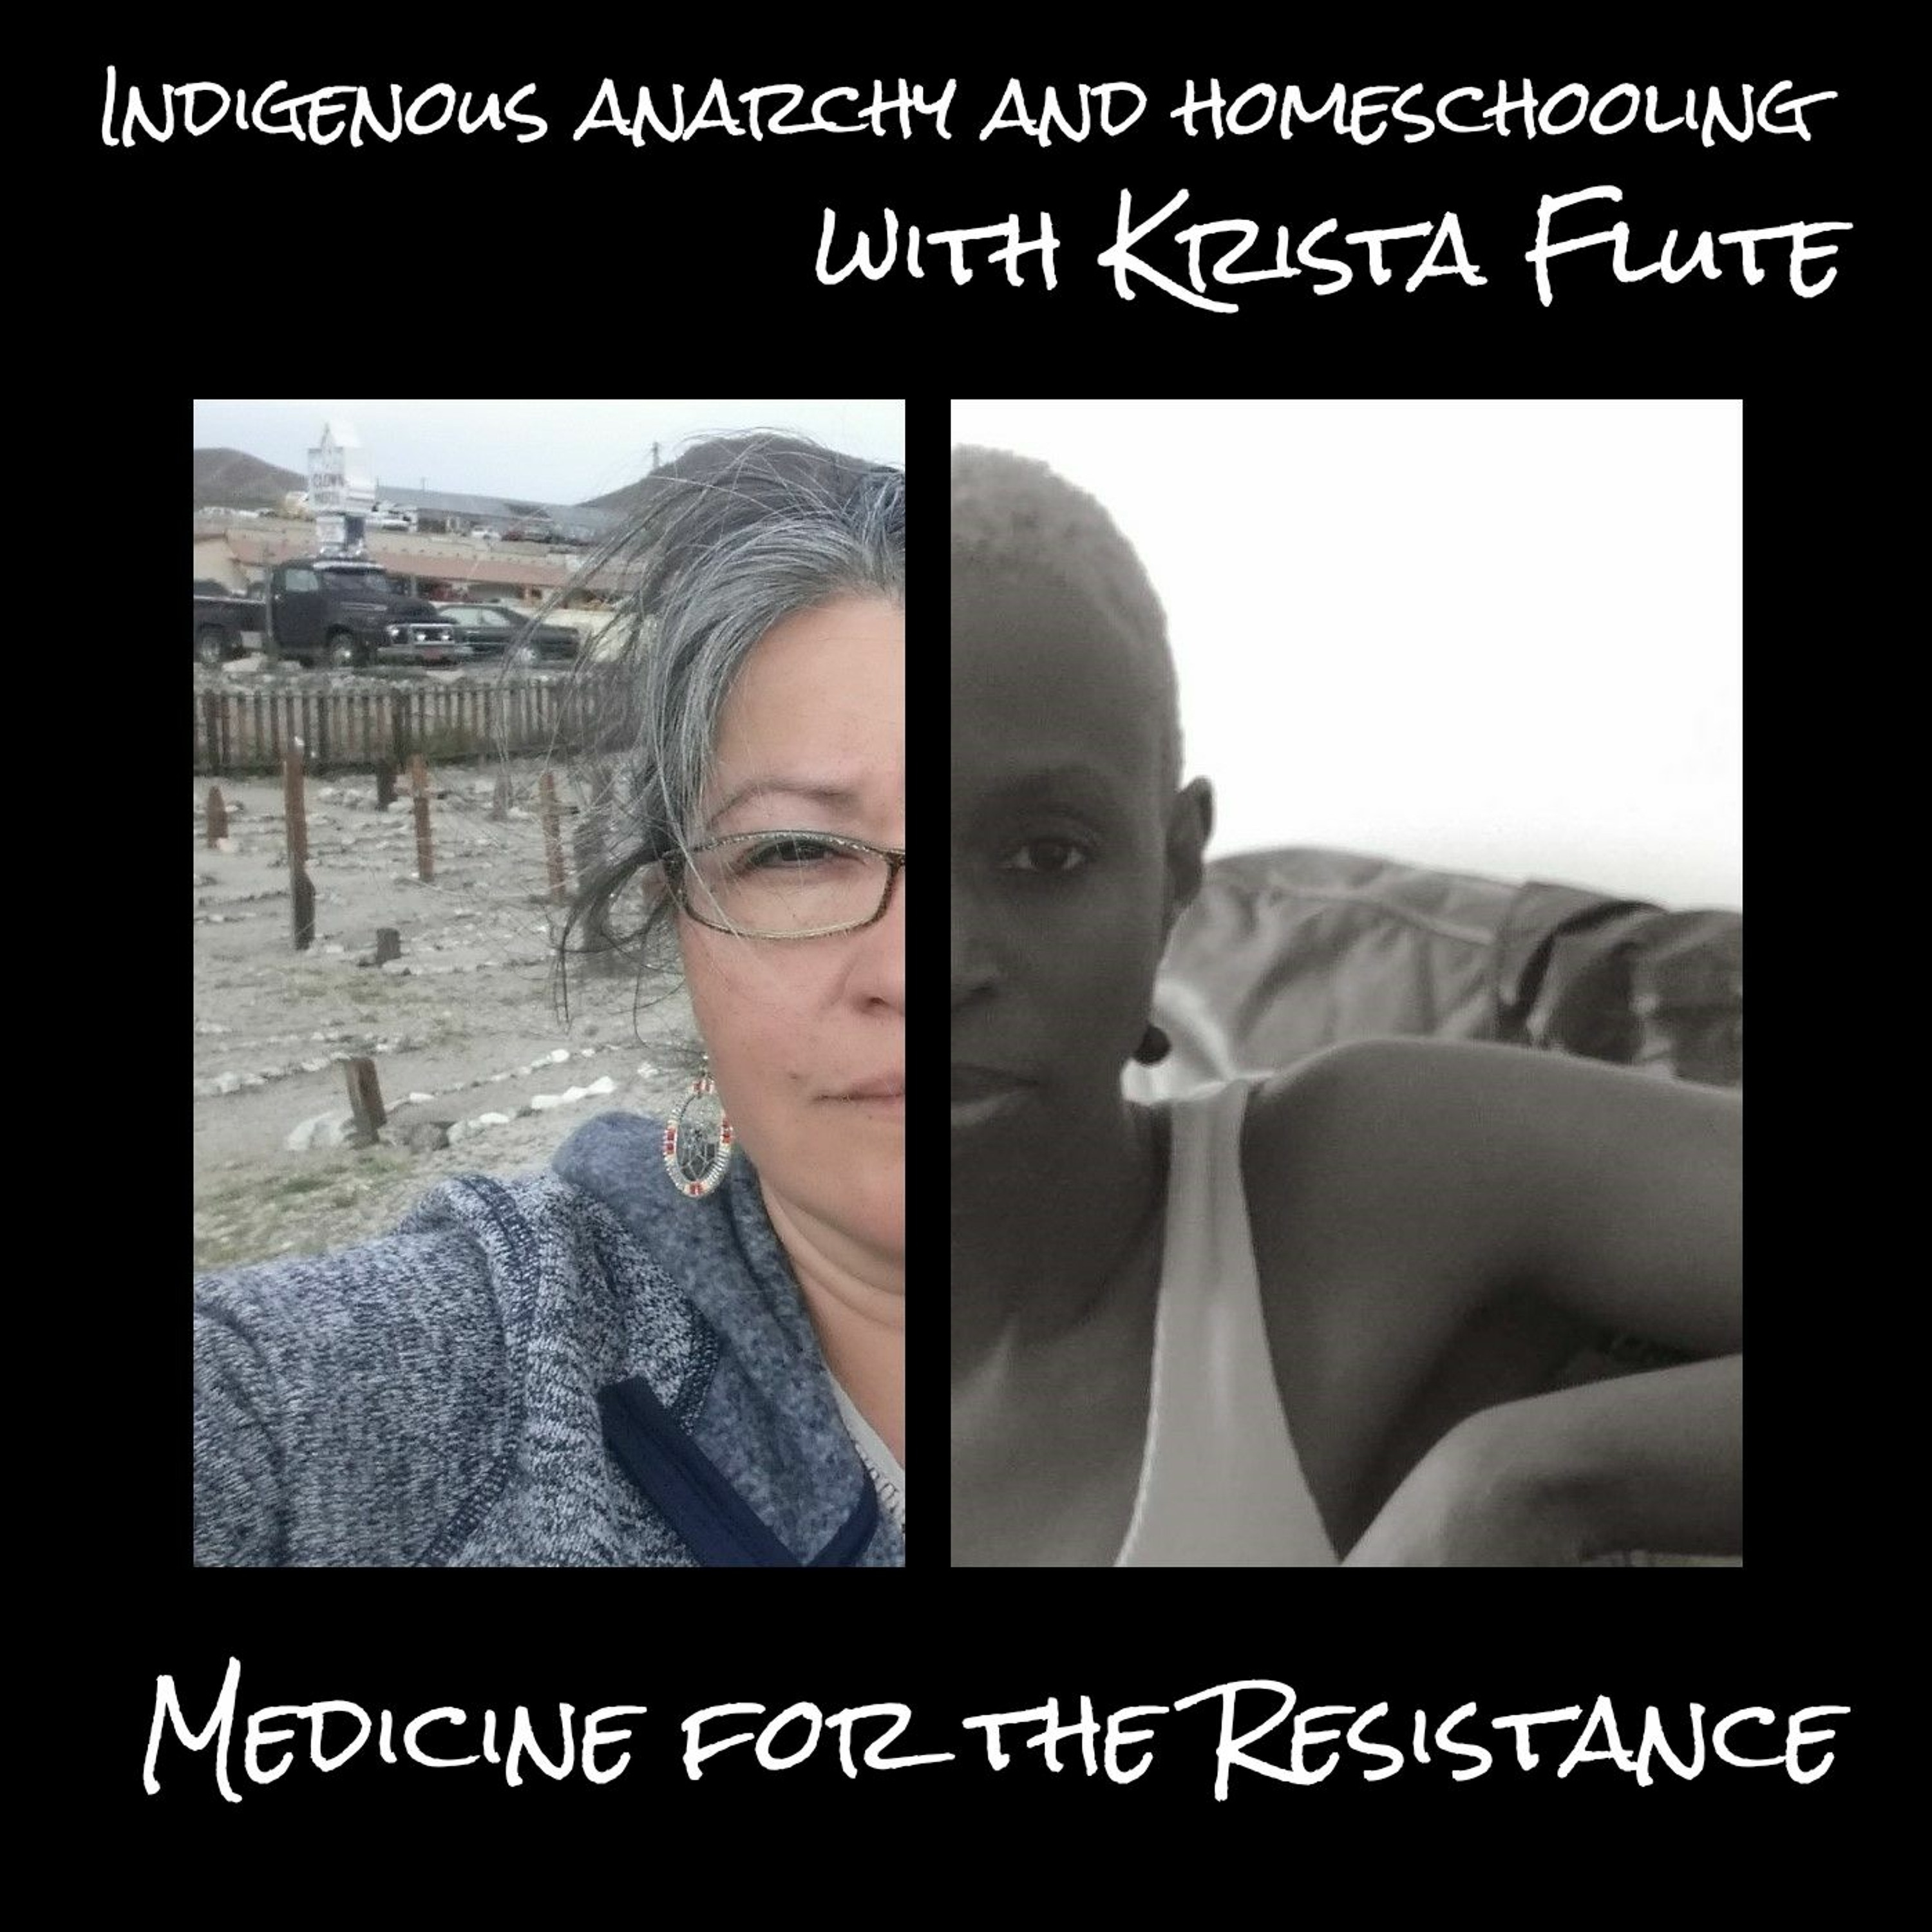 Indigenous Anarchy and Homeschooling with Krista Flute